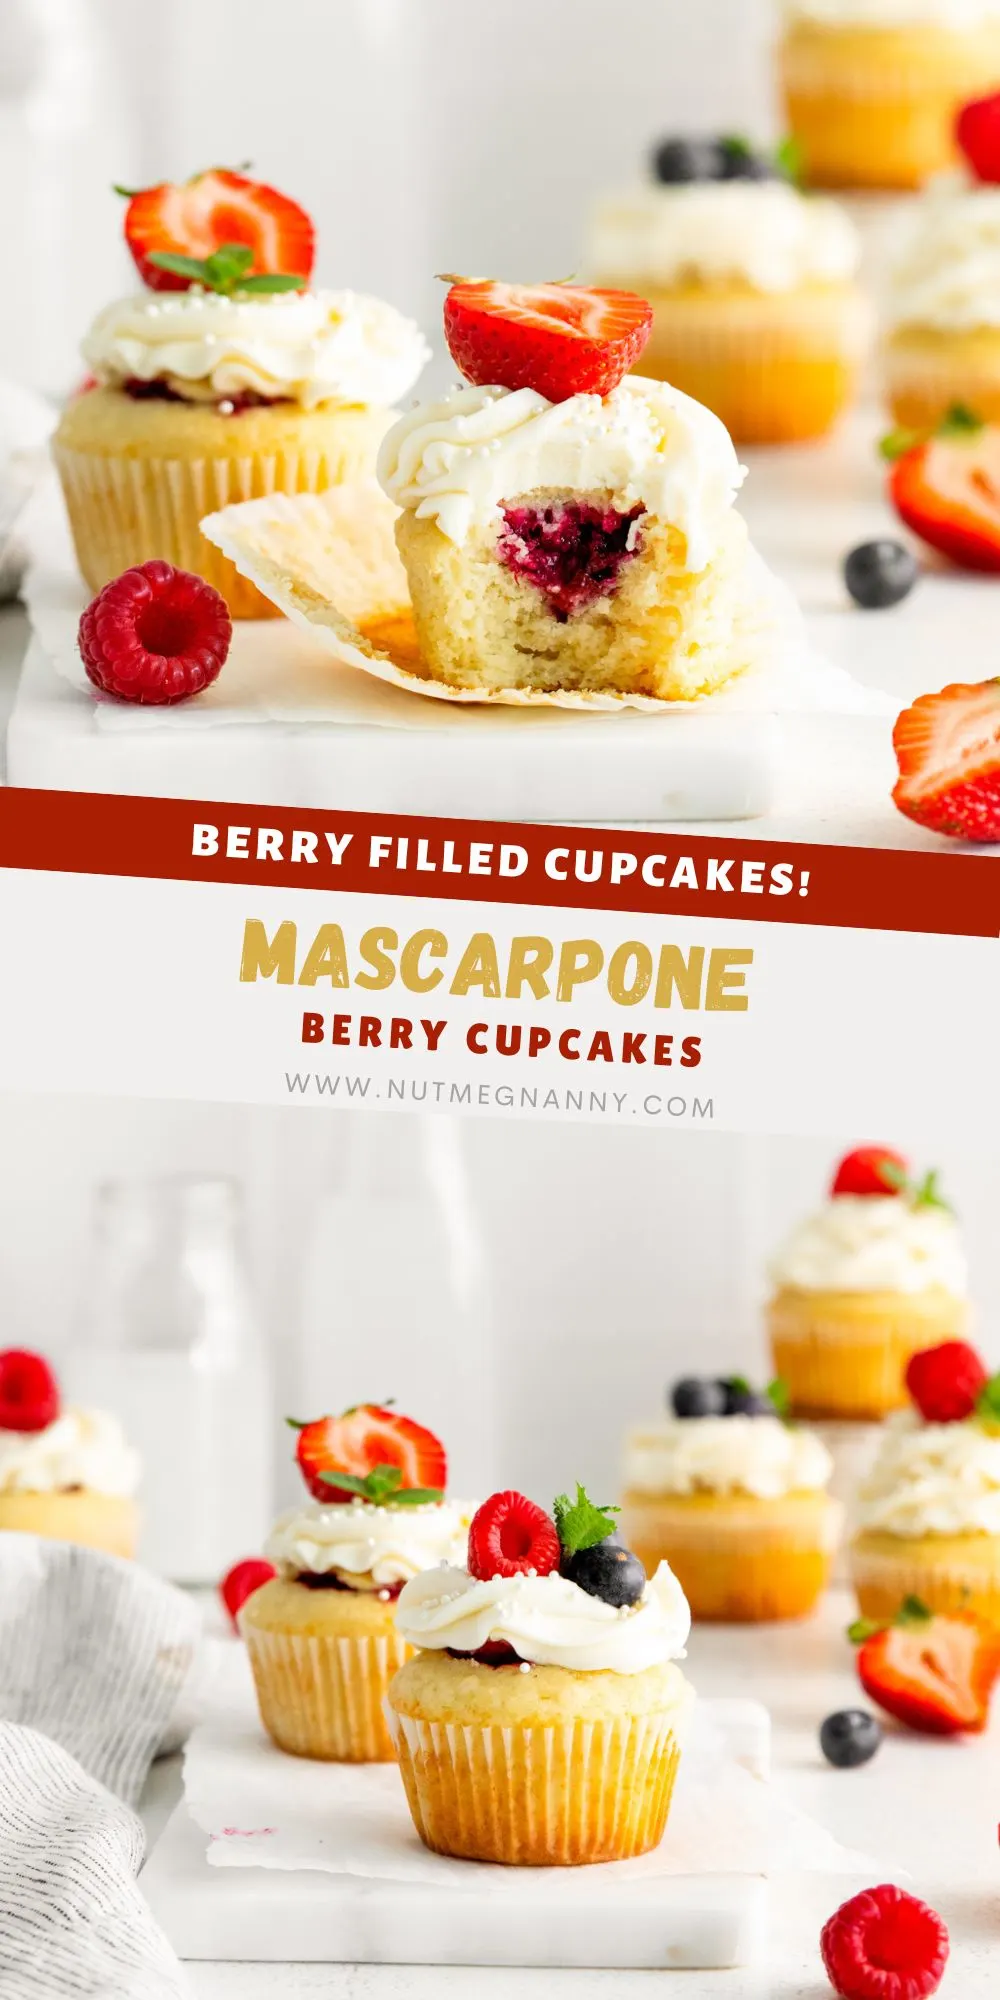 Mascarpone Berry Cupcakes Pin for Pinterest.